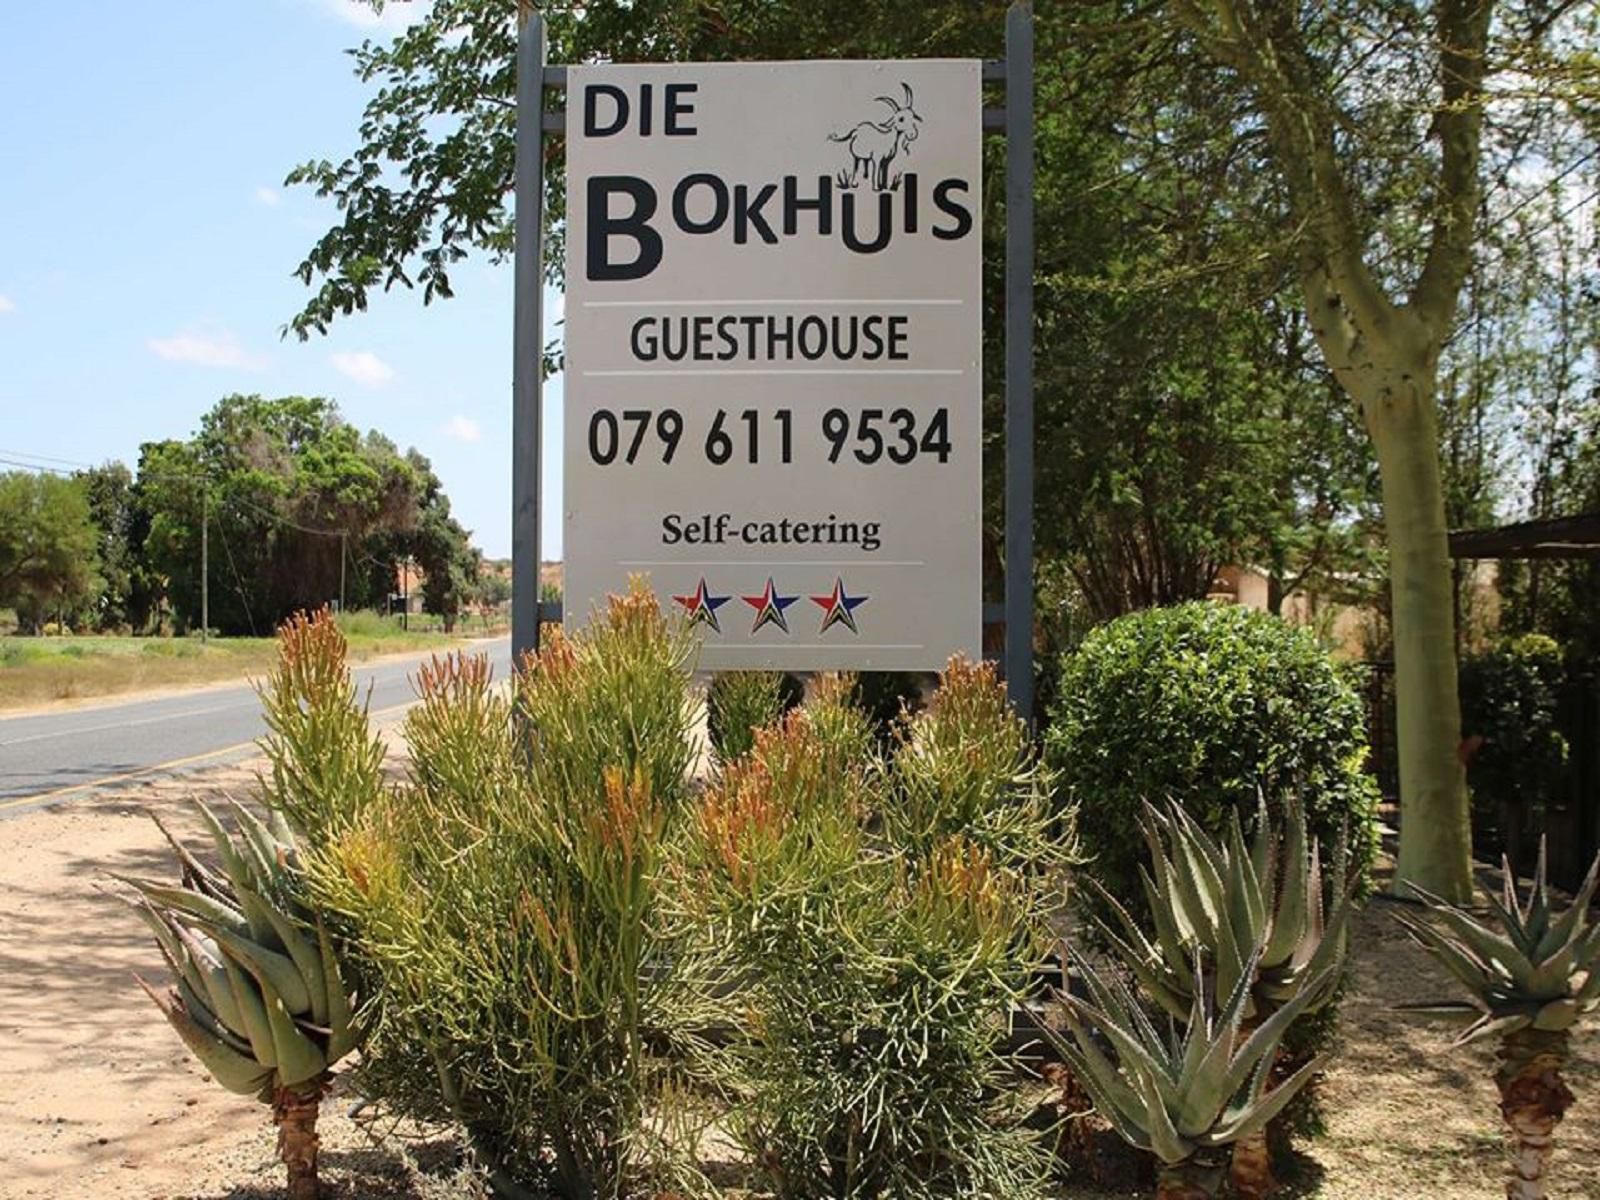 Die Bokhuis Guesthouse Vredendal Western Cape South Africa Cactus, Plant, Nature, House, Building, Architecture, Sign, Text